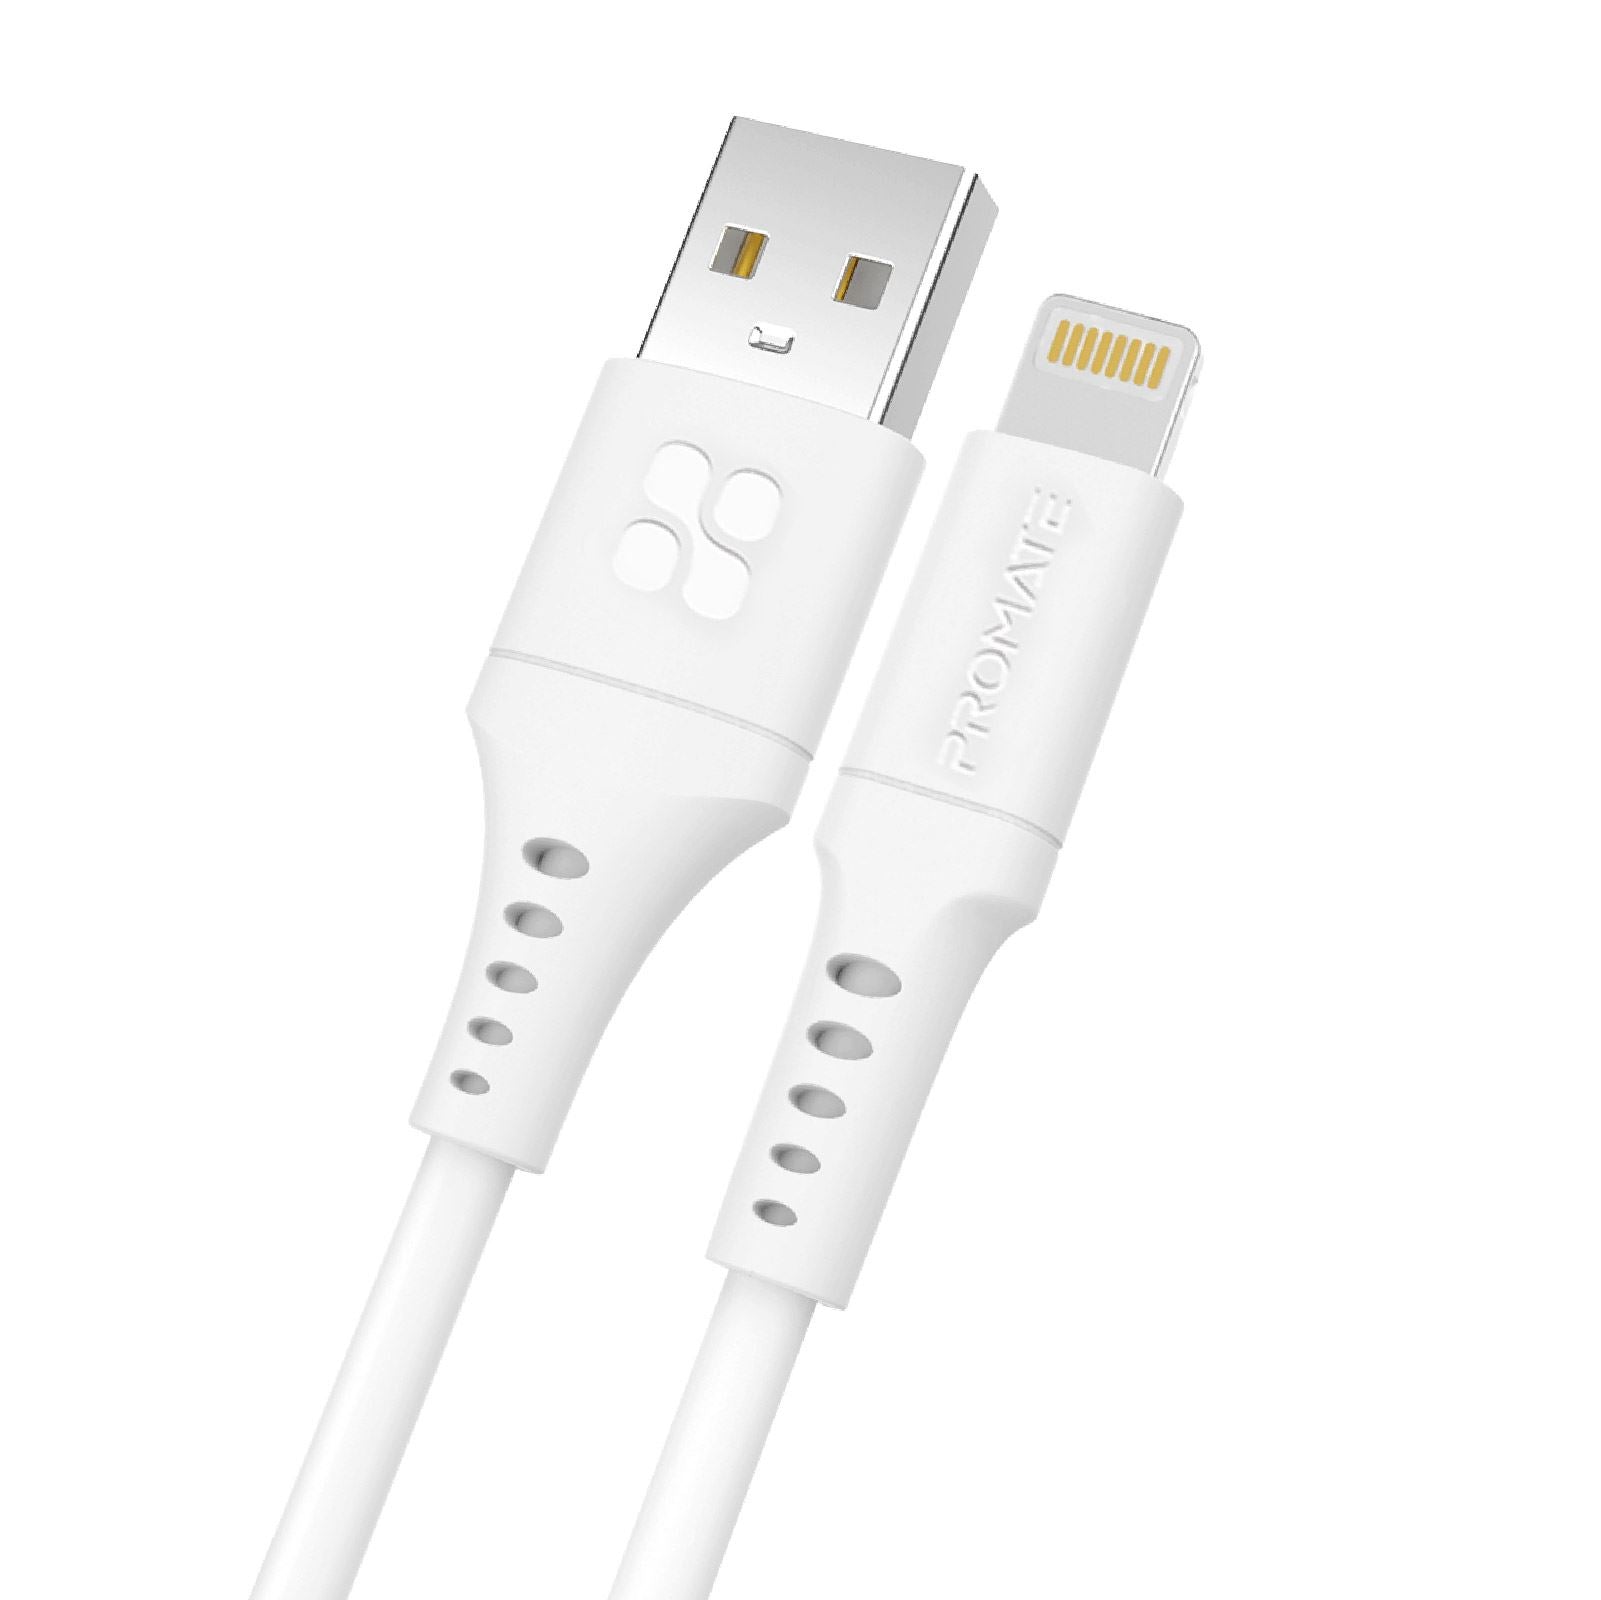 PROMATE_2m_USB-A_to_Lightning_Data_&_Charge_Cable._Data_Transfer_Rate_480Mbps.Total_Current_2.4A._Durable_Soft_Silicon_Cable._Tangle_Resistant_25000+_Bend_Tested._White_**Not_MFI_Certified** 1655